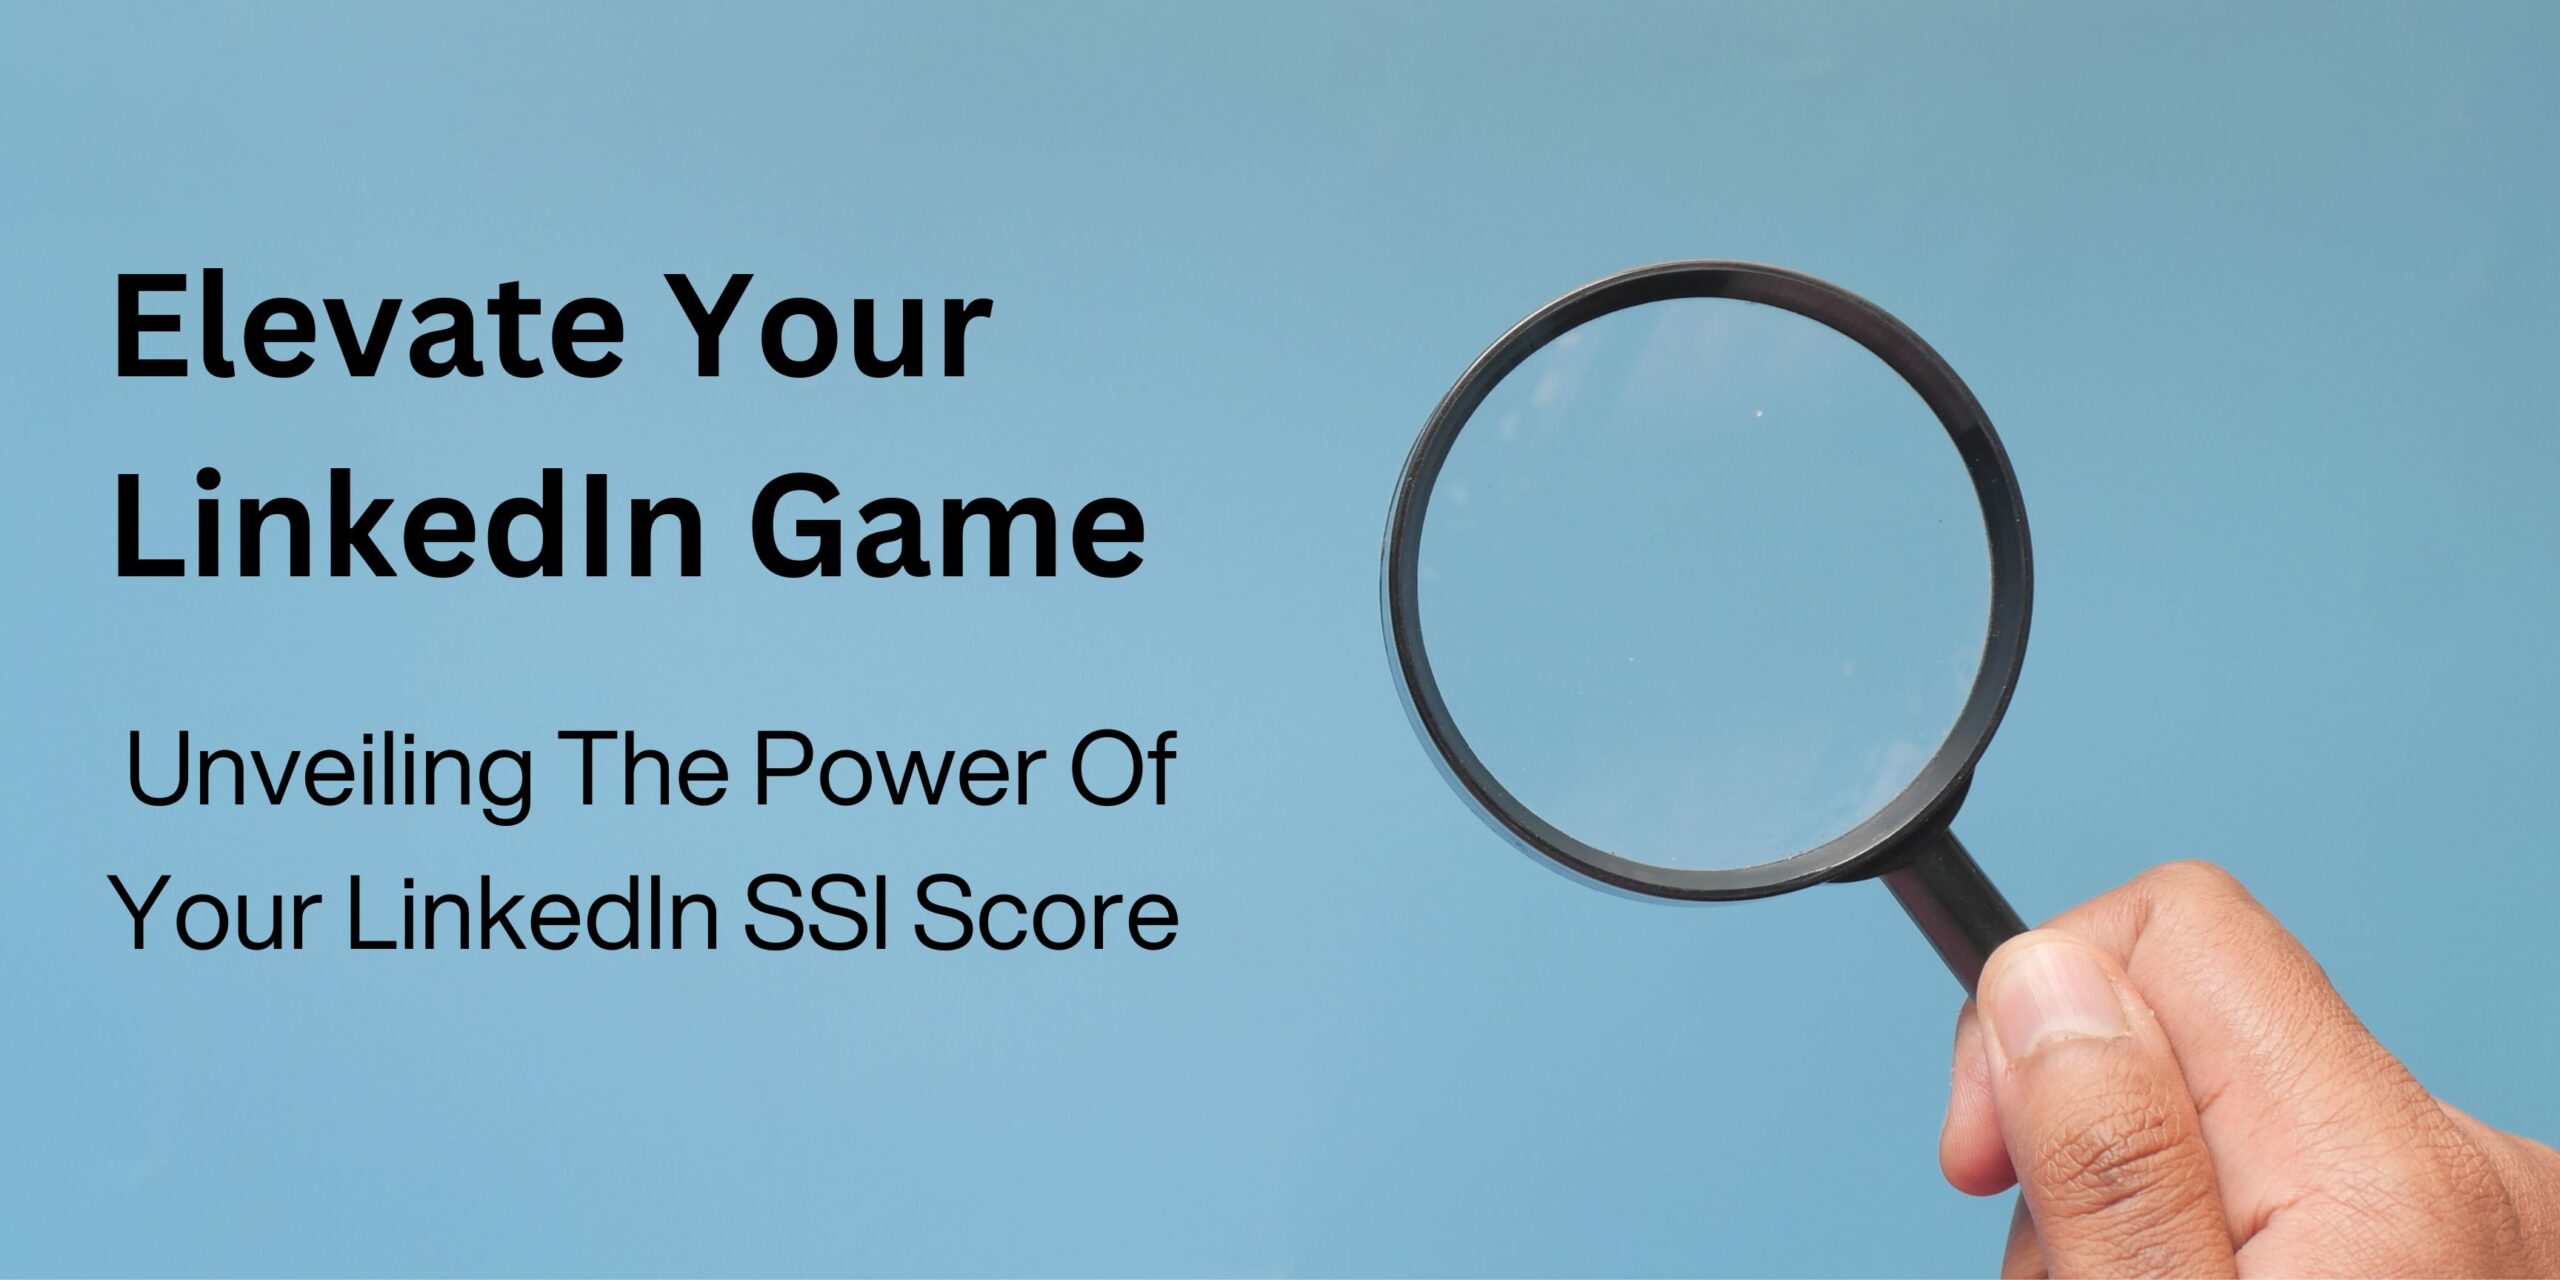 LinkedIn Social Selling Game: Unveiling The Power Of Your LinkedIn SSI Score